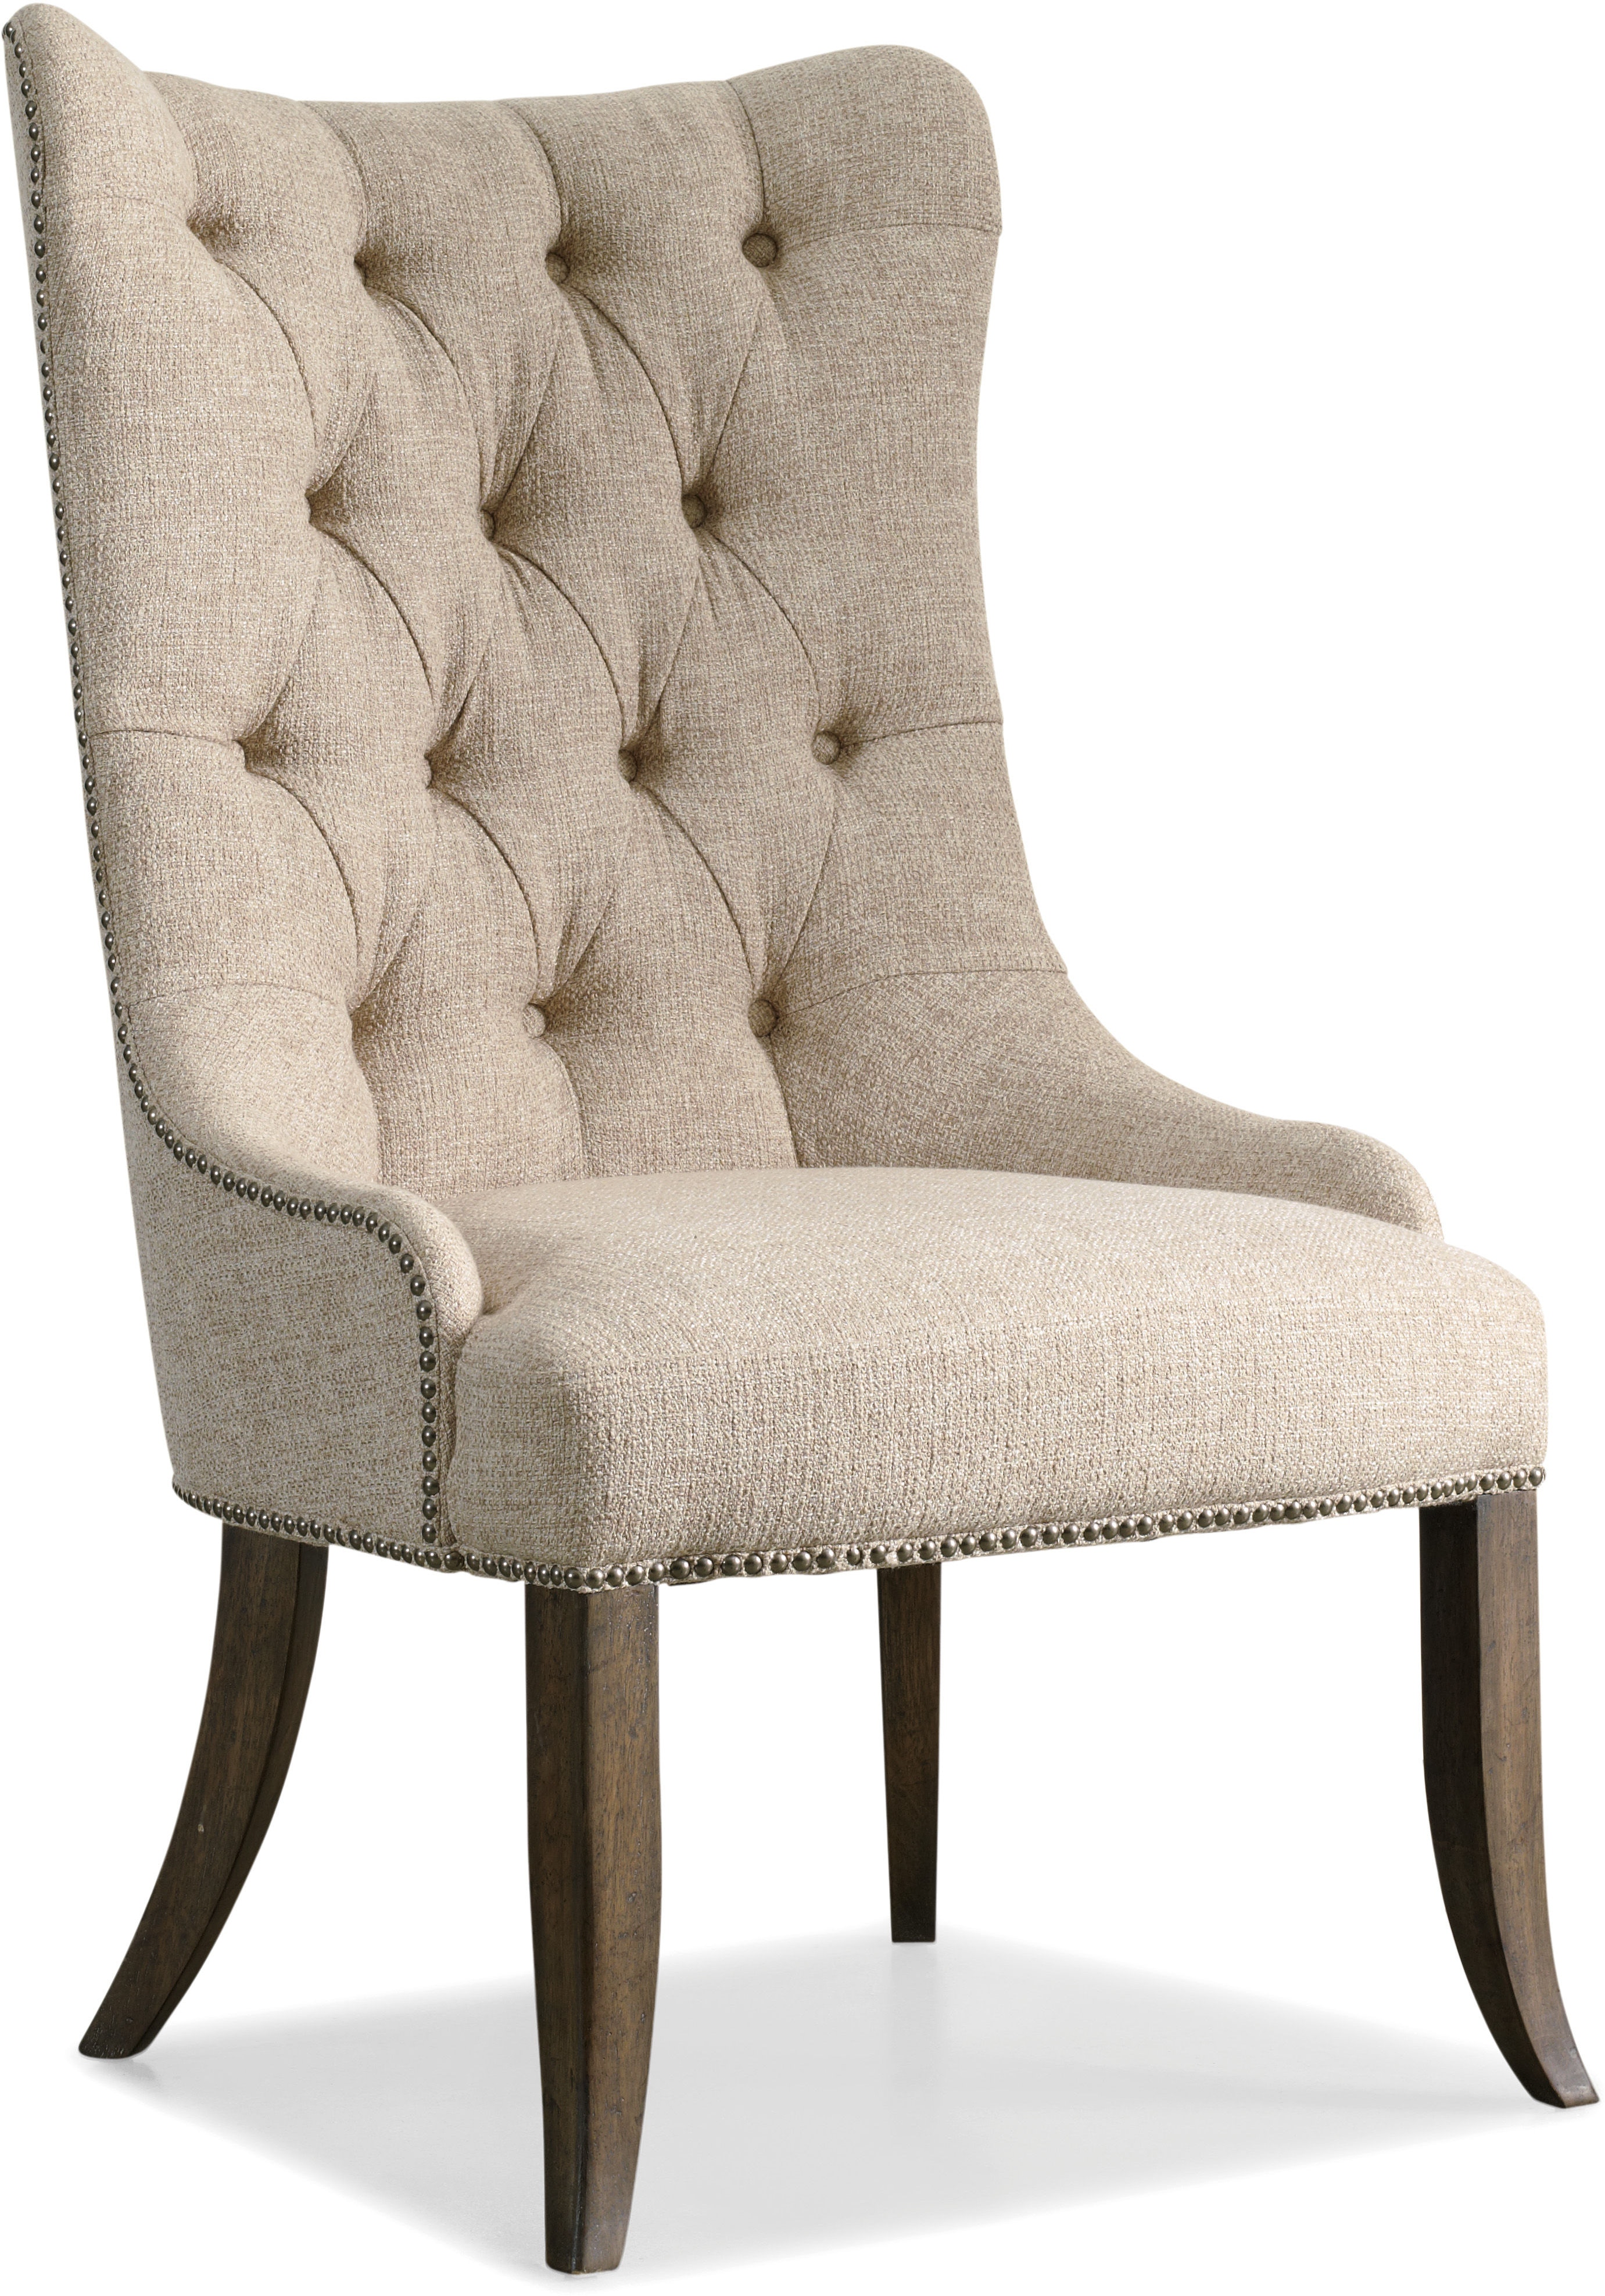 Hooker Furniture Dining Room Rhapsody Tufted Dining Chair 2 Per Carton Price Ea 5070 75511